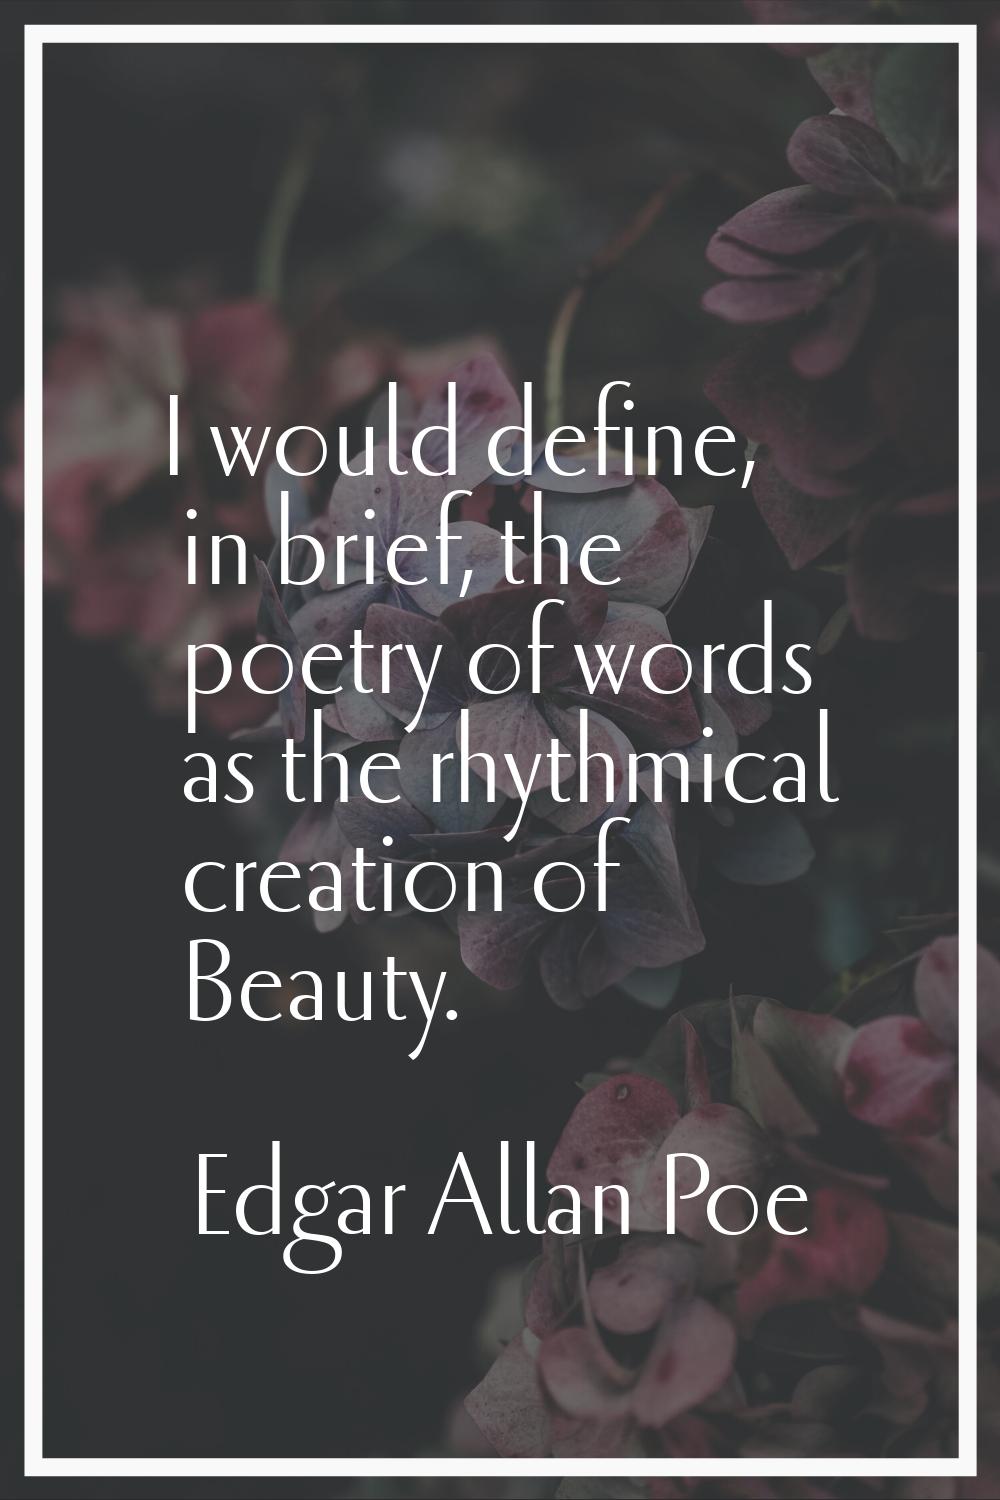 I would define, in brief, the poetry of words as the rhythmical creation of Beauty.